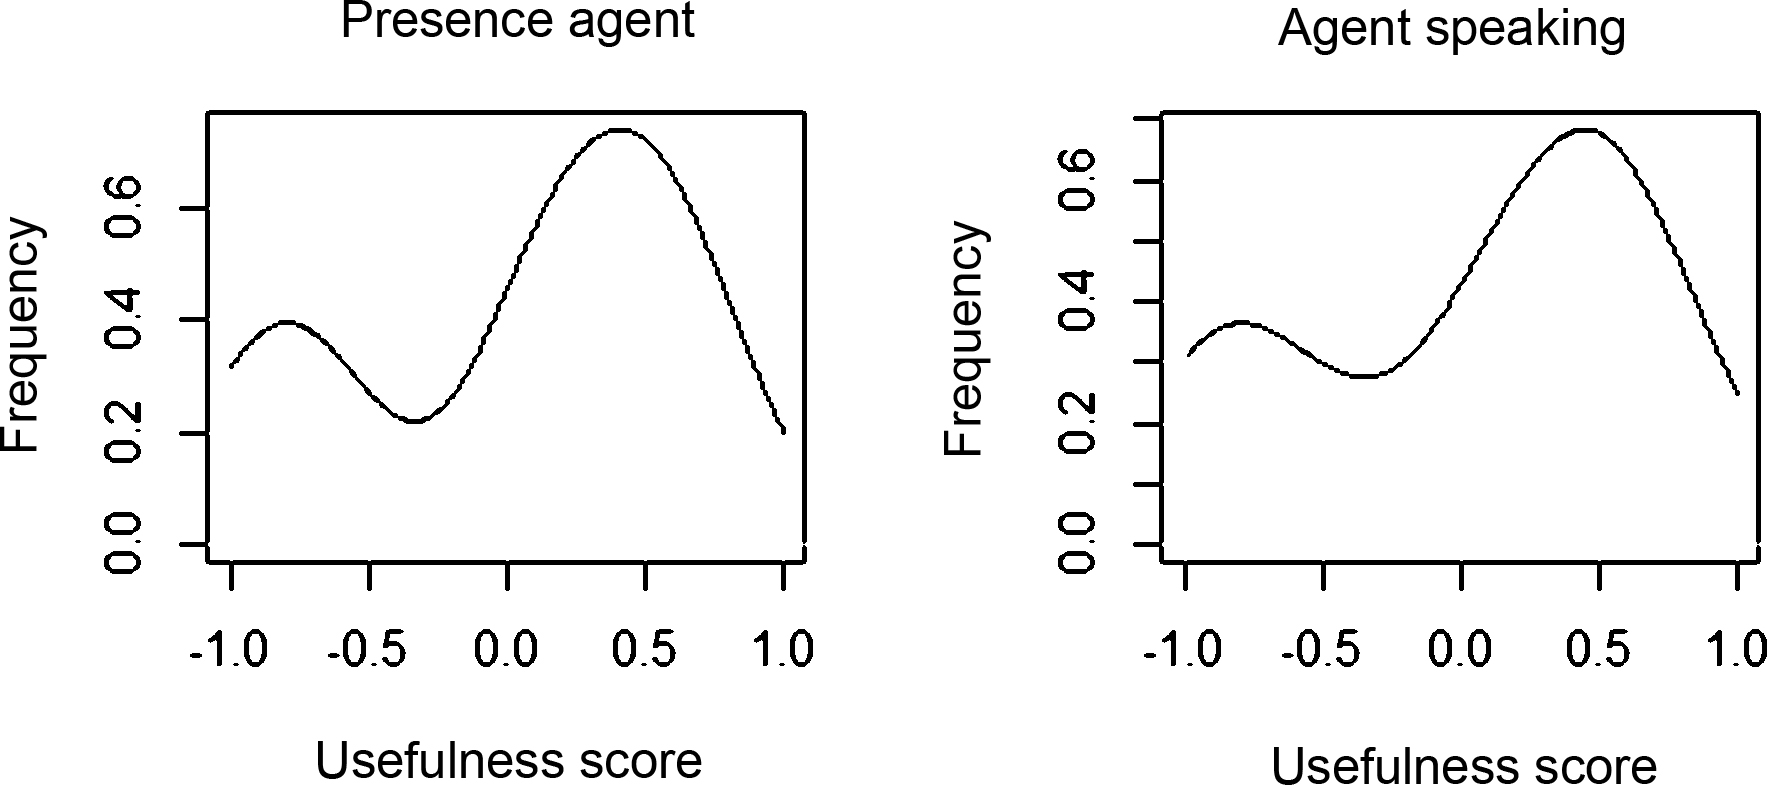 Frequency Histograms of the perceived usefulness of the virtual agent and the fact that it spoke, as quizzed with the statement ‘The virtual agent is a useful addition to this exercise’ and ‘The fact that the virtual agent spoke was a useful addition to this exercise’. -1 corresponds to ‘don’t agree at all’ while 1 corresponds to ‘fully agree’.